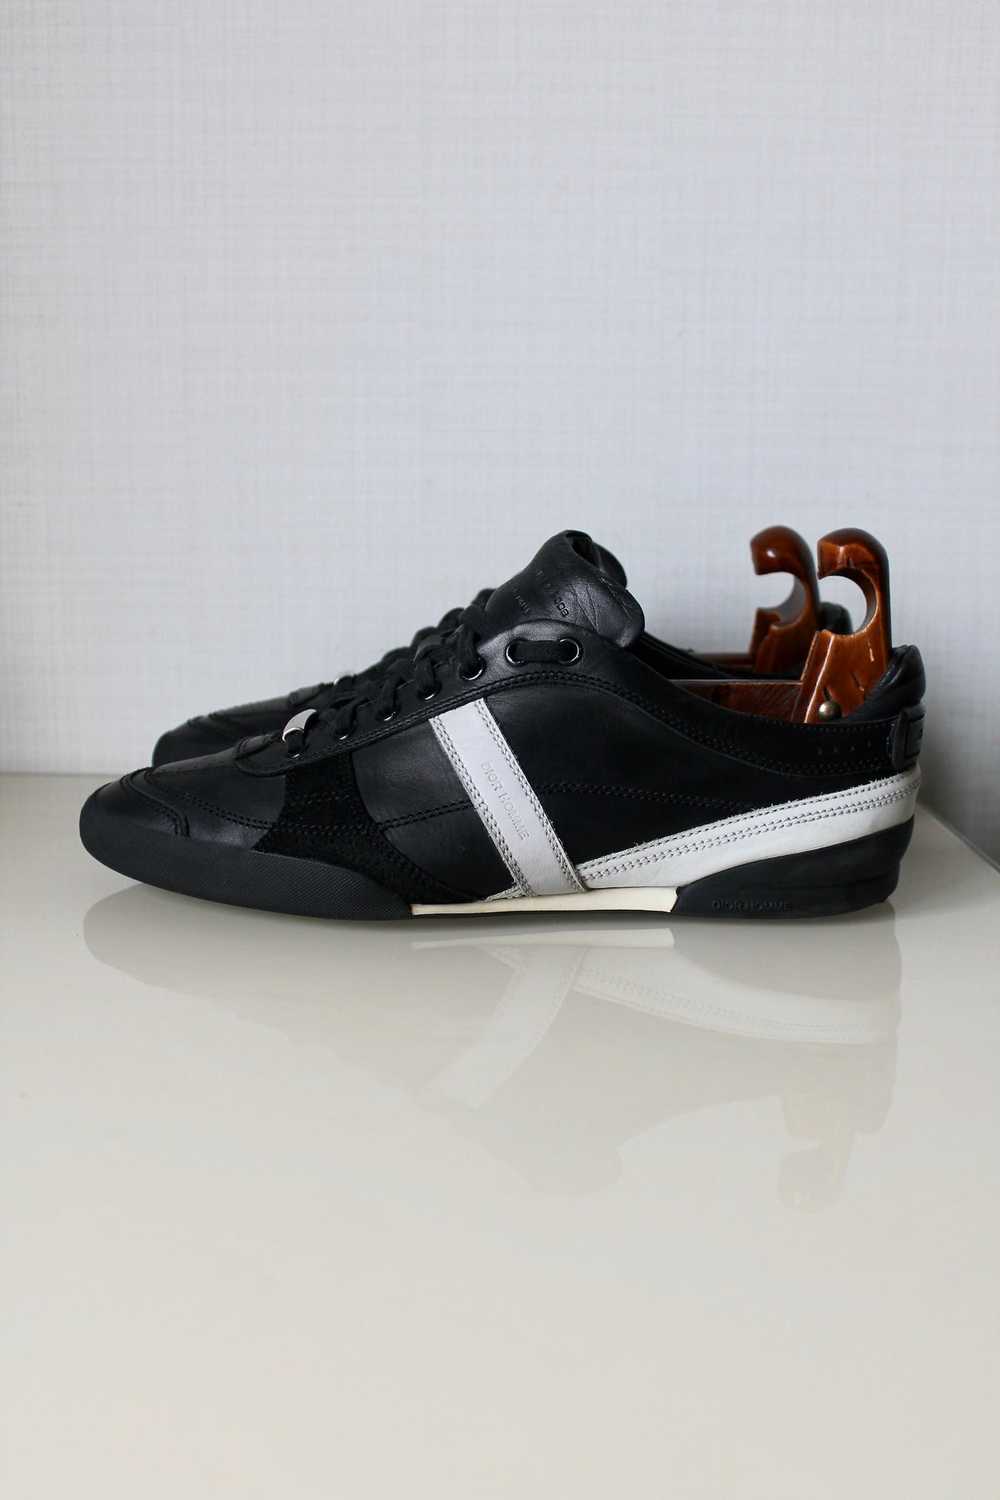 Dior DIOR HOMME Leather Low Top Sneakers Black - image 2